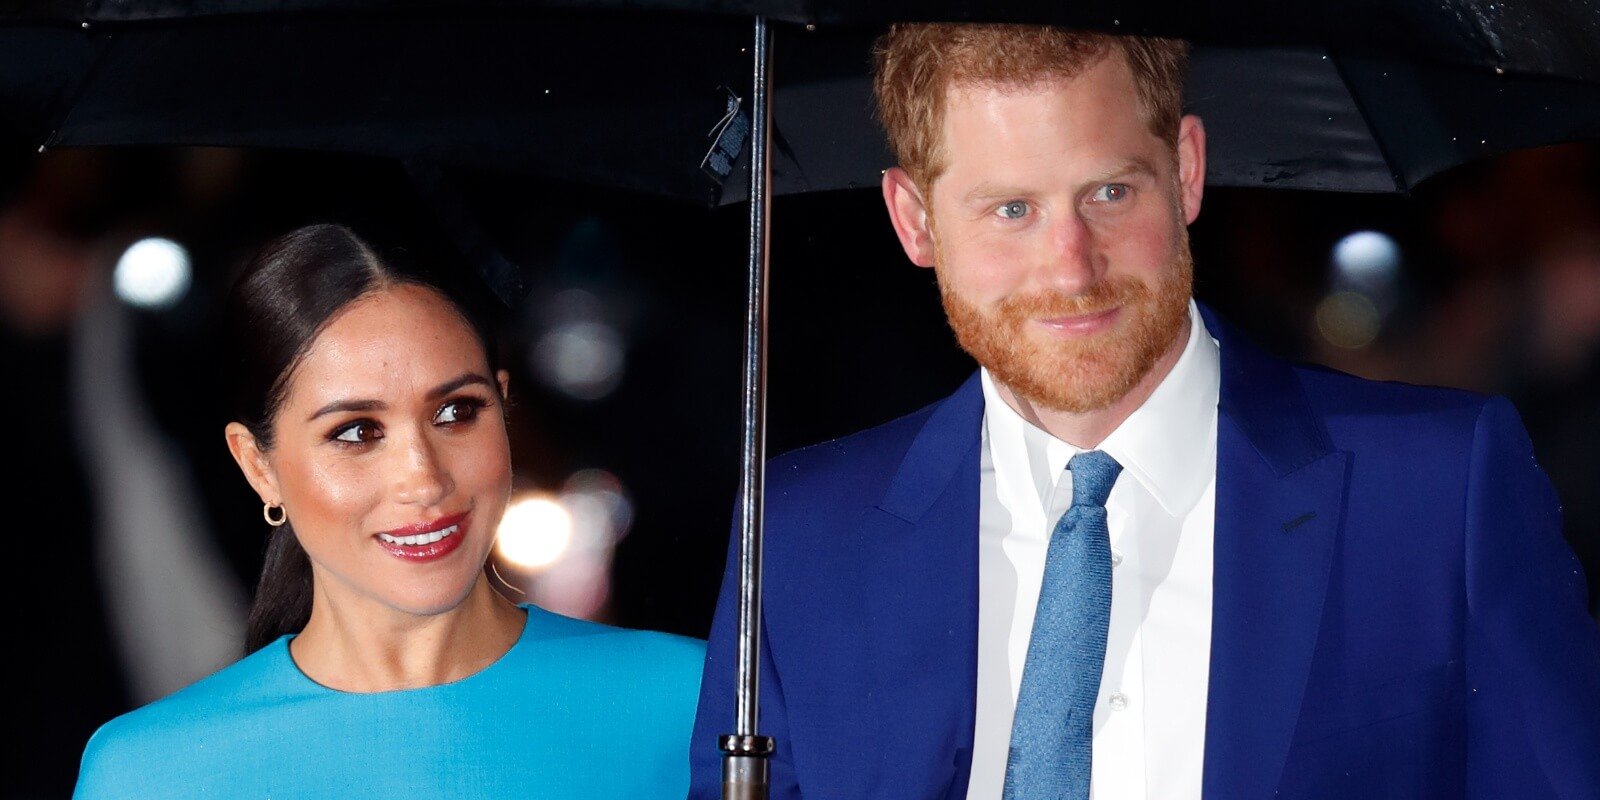 Meghan Markle and Prince Harry are photographed in March 2020, the same month they left their roles as senior royals.